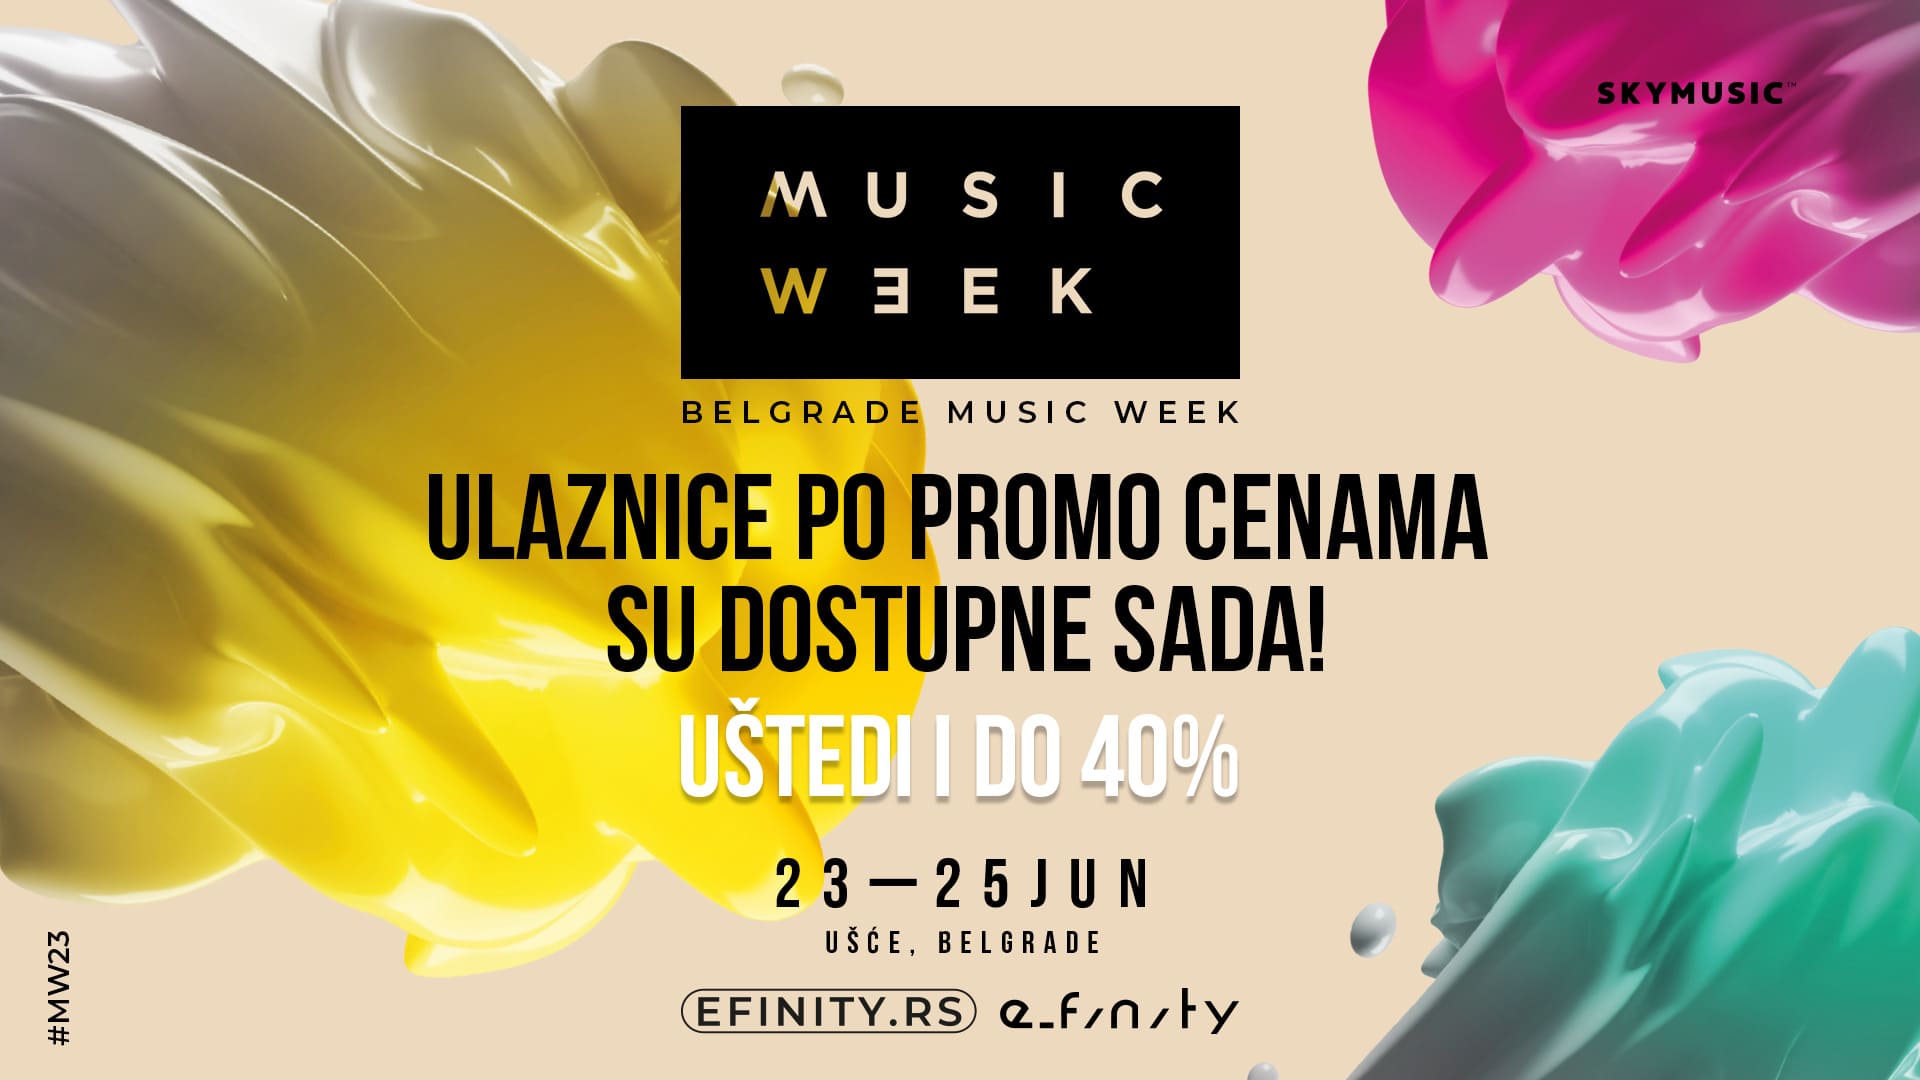 Tickets for Belgrade Music Week starting today at PROMO prices